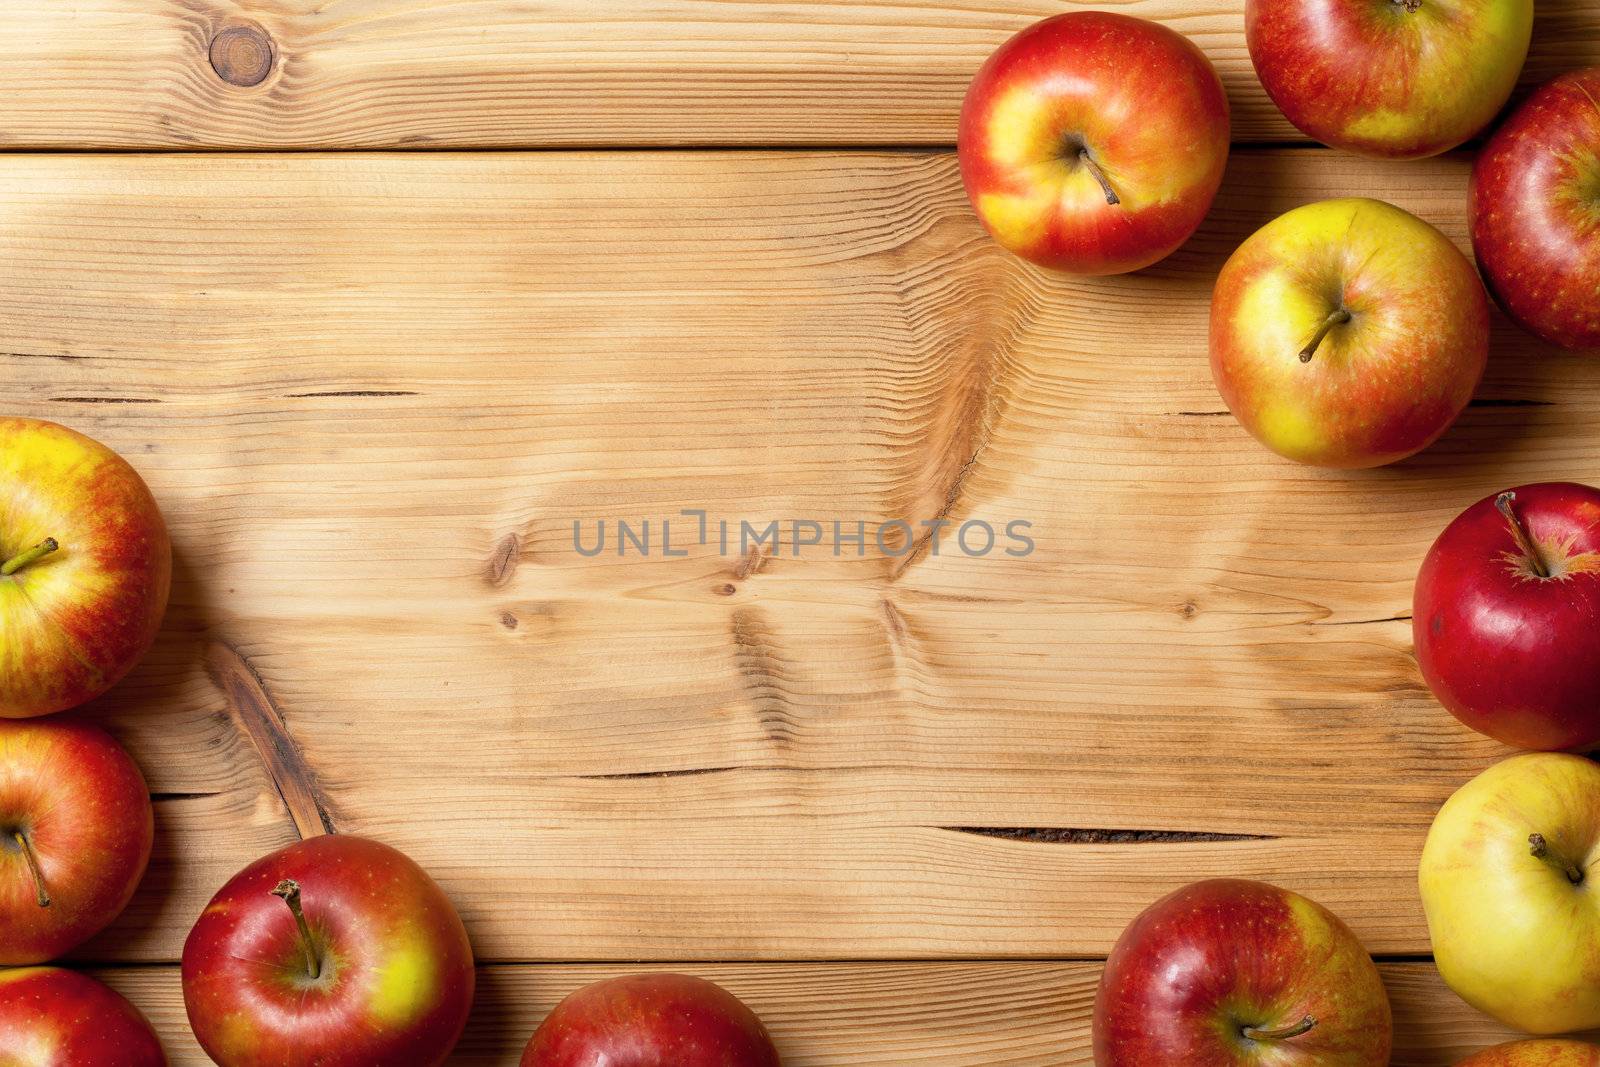 Apples on wooden table background. Fresh fruit backdrop with empty room for text